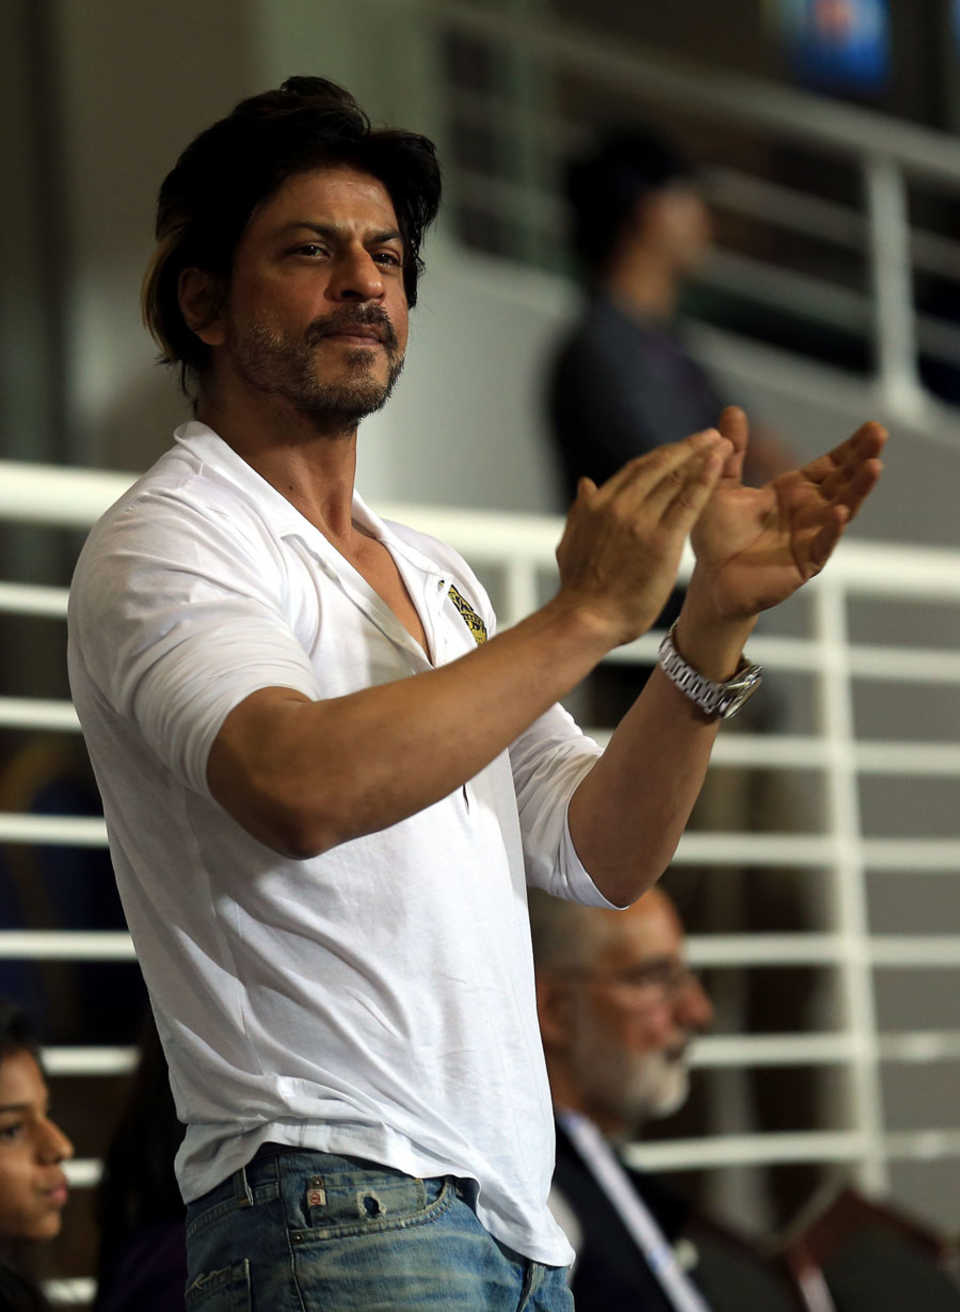 Shah Rukh Khan lends support to his team